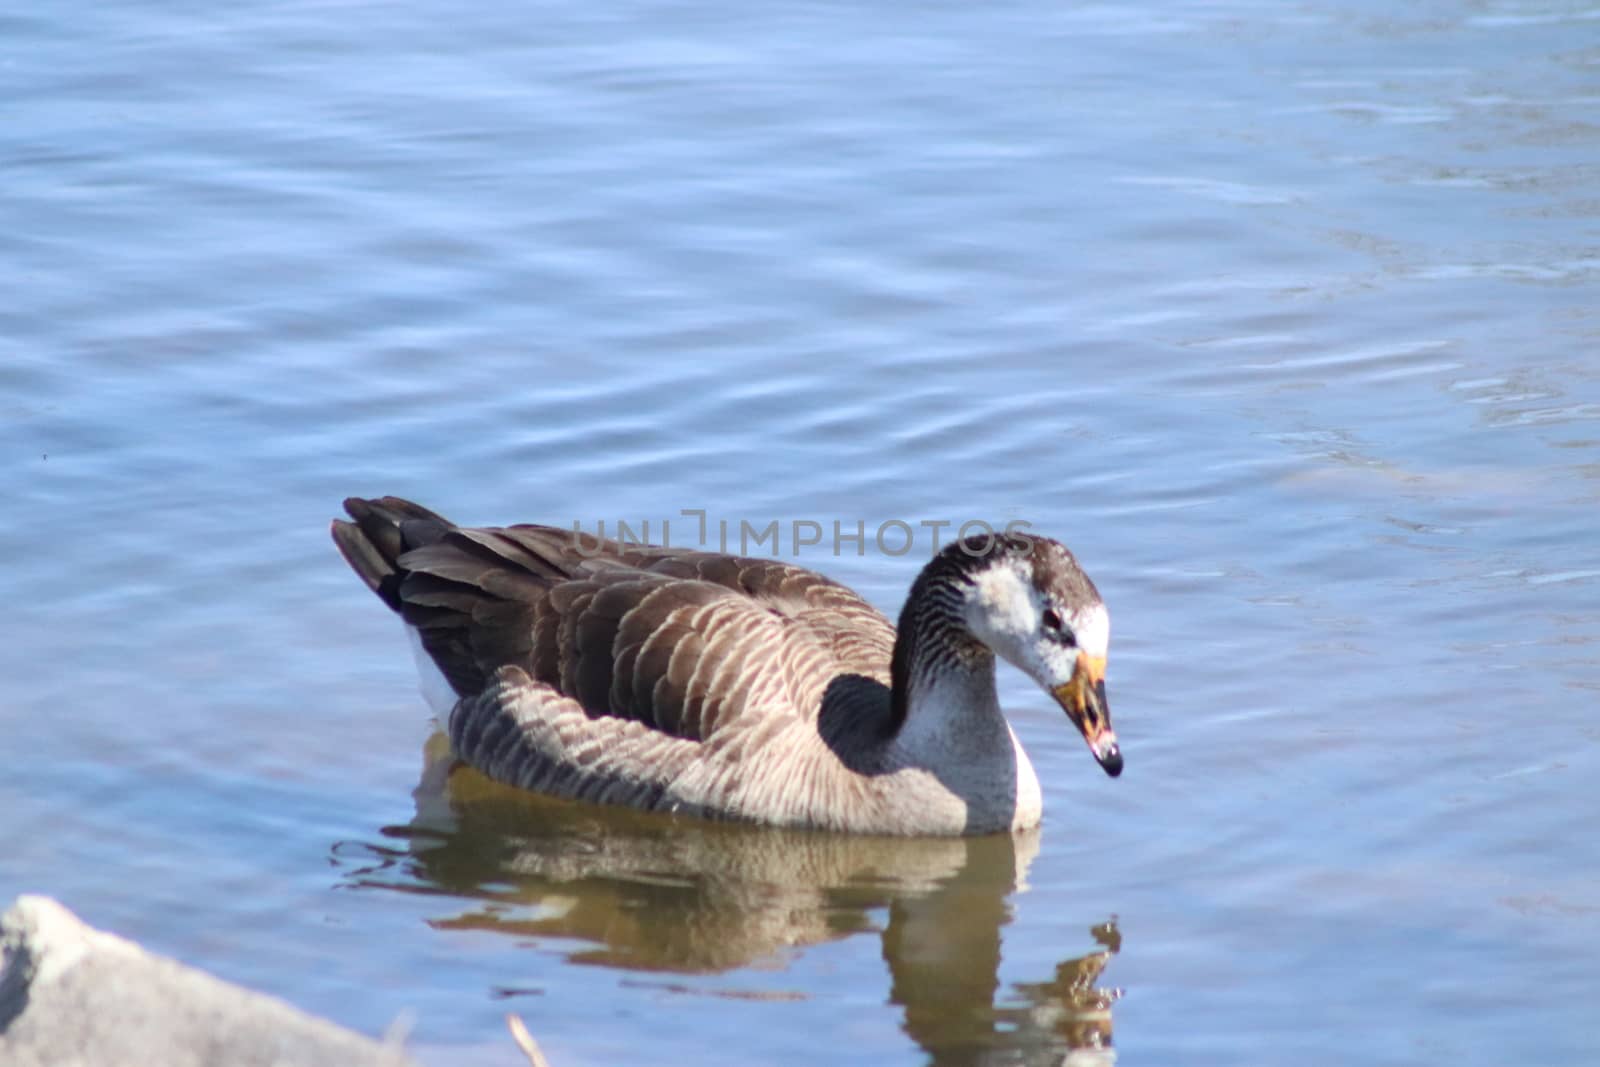 A goose swimming in water next to a body of water by gena_wells